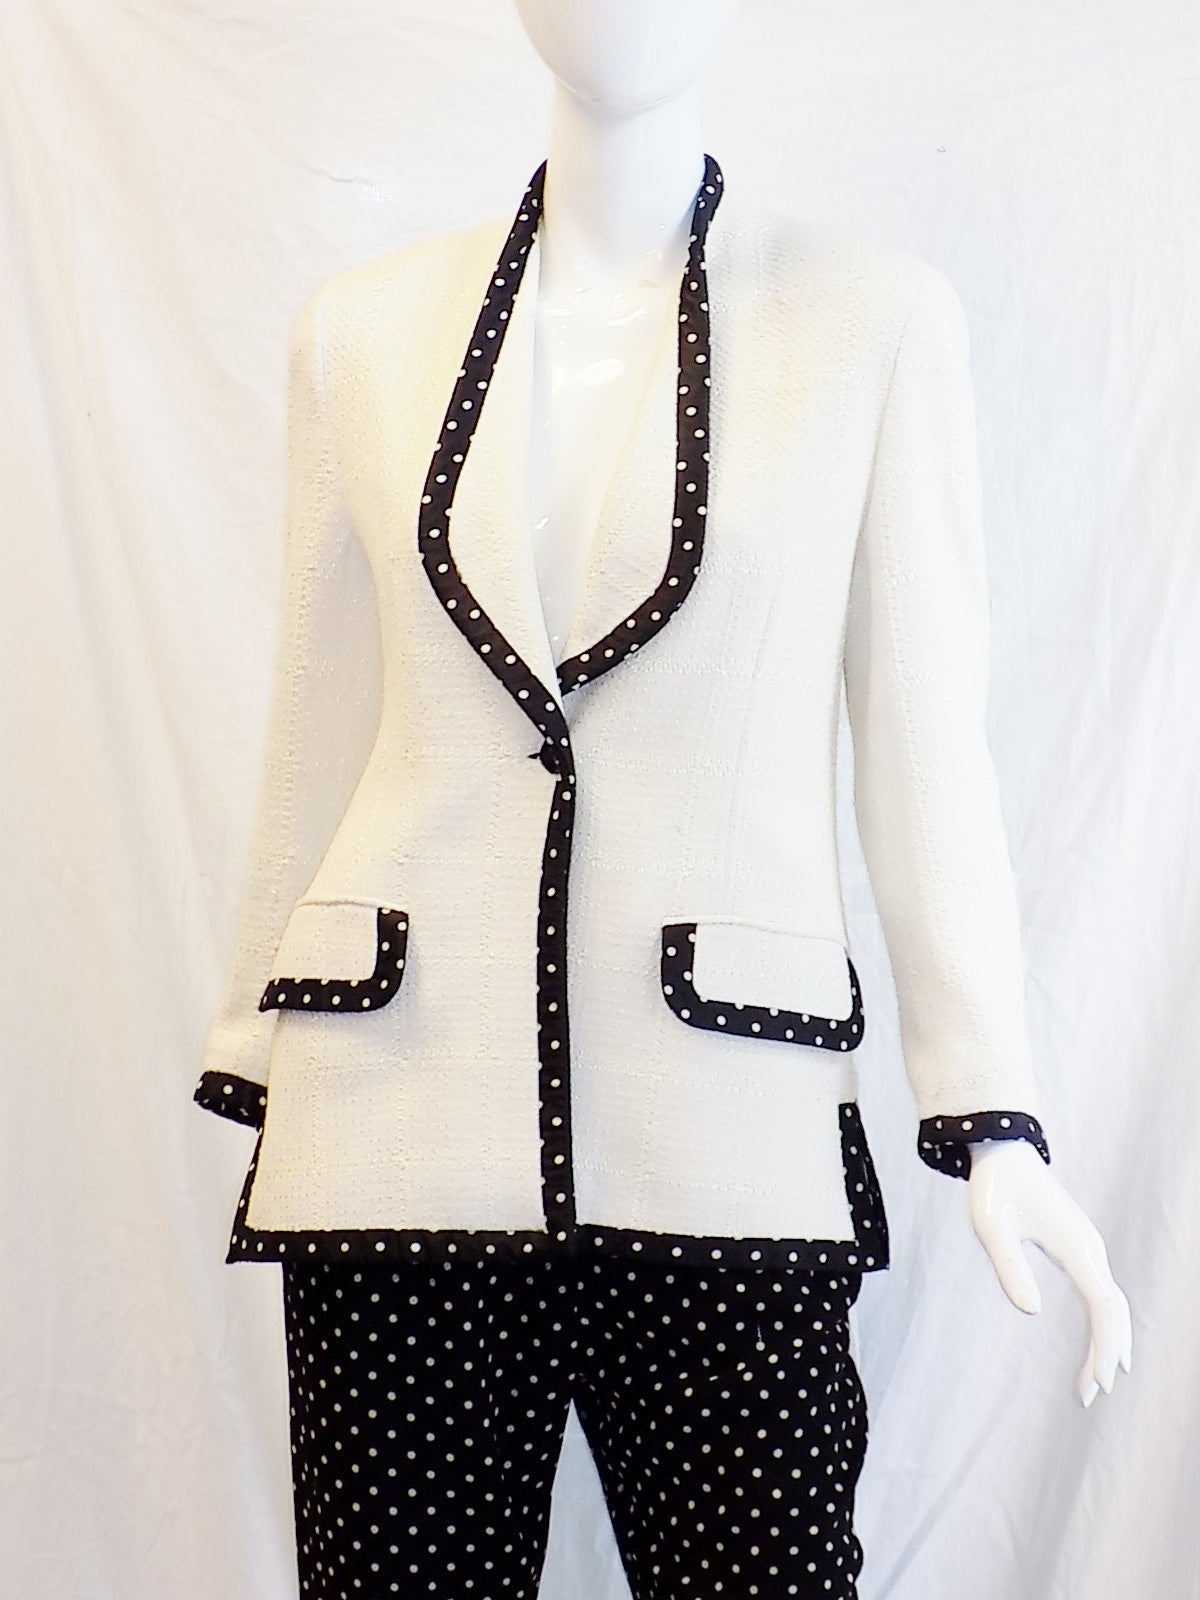 Perfect  for spring and summer and very chic! White  on white  raw silk ecru and black and white polkadot crepe silk  pants. Matching trim on the jacket.  Enamel painted buttons. Pristine condition. 
States size 12 but very small 12
Please refer